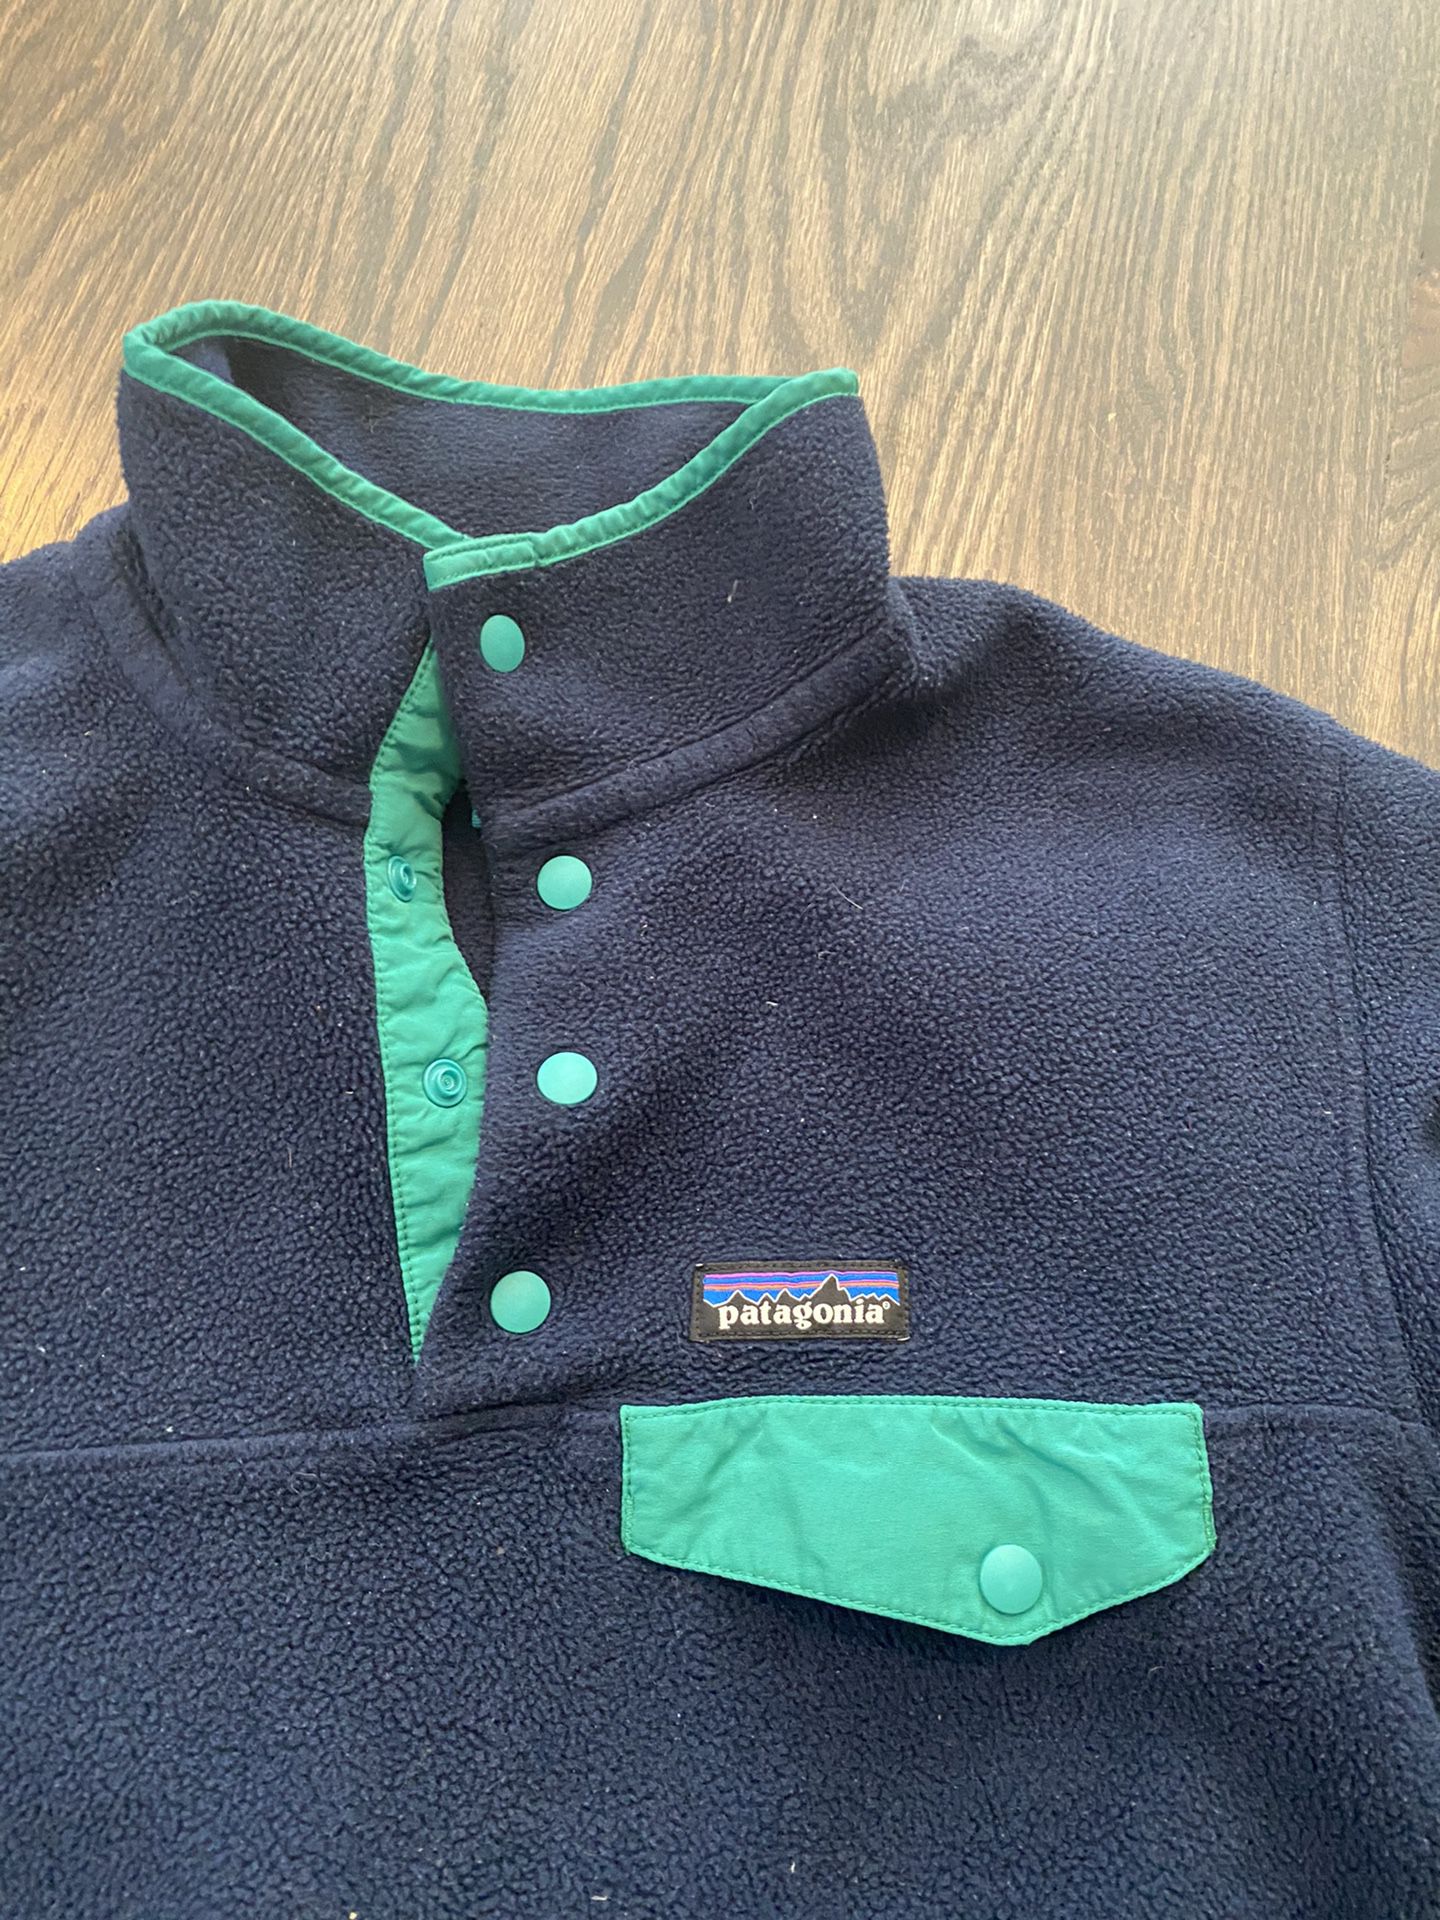 Patagonia fleece pullover size small